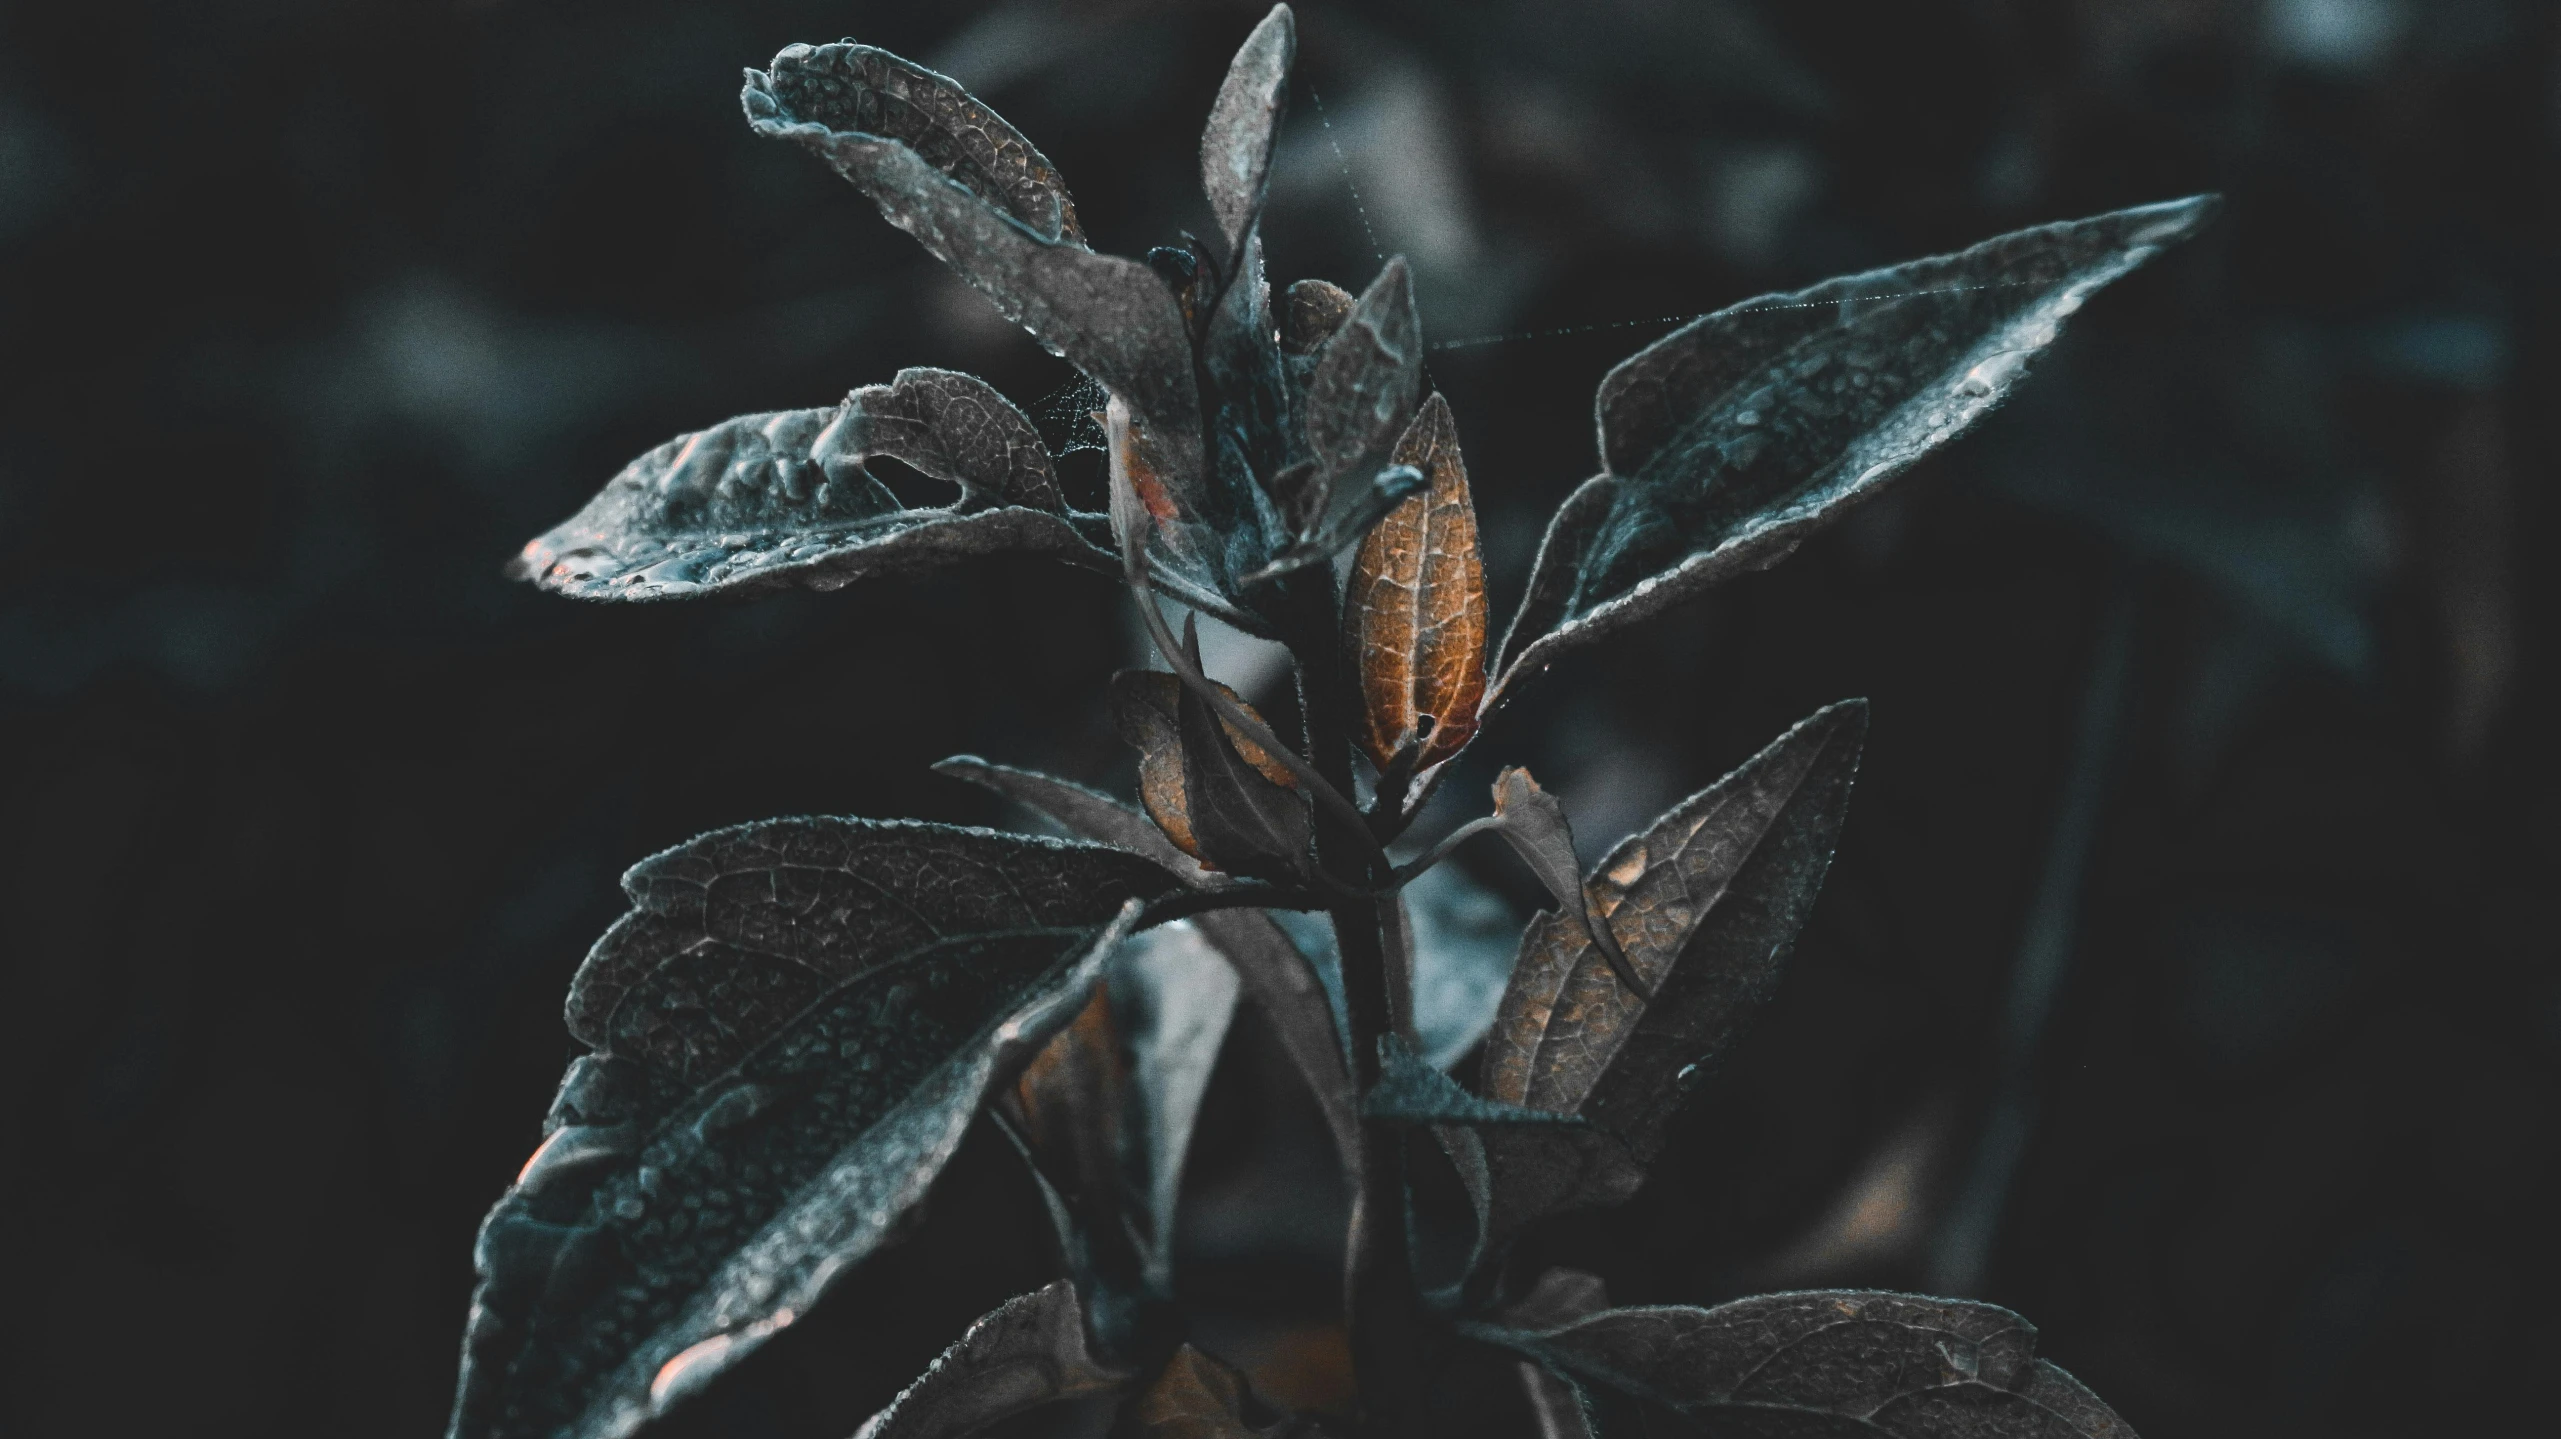 a close up of a plant with water droplets on it, inspired by Elsa Bleda, trending on pexels, australian tonalism, tooth wu : : quixel megascans, chilly dark mood, leaves on branches, black flowers